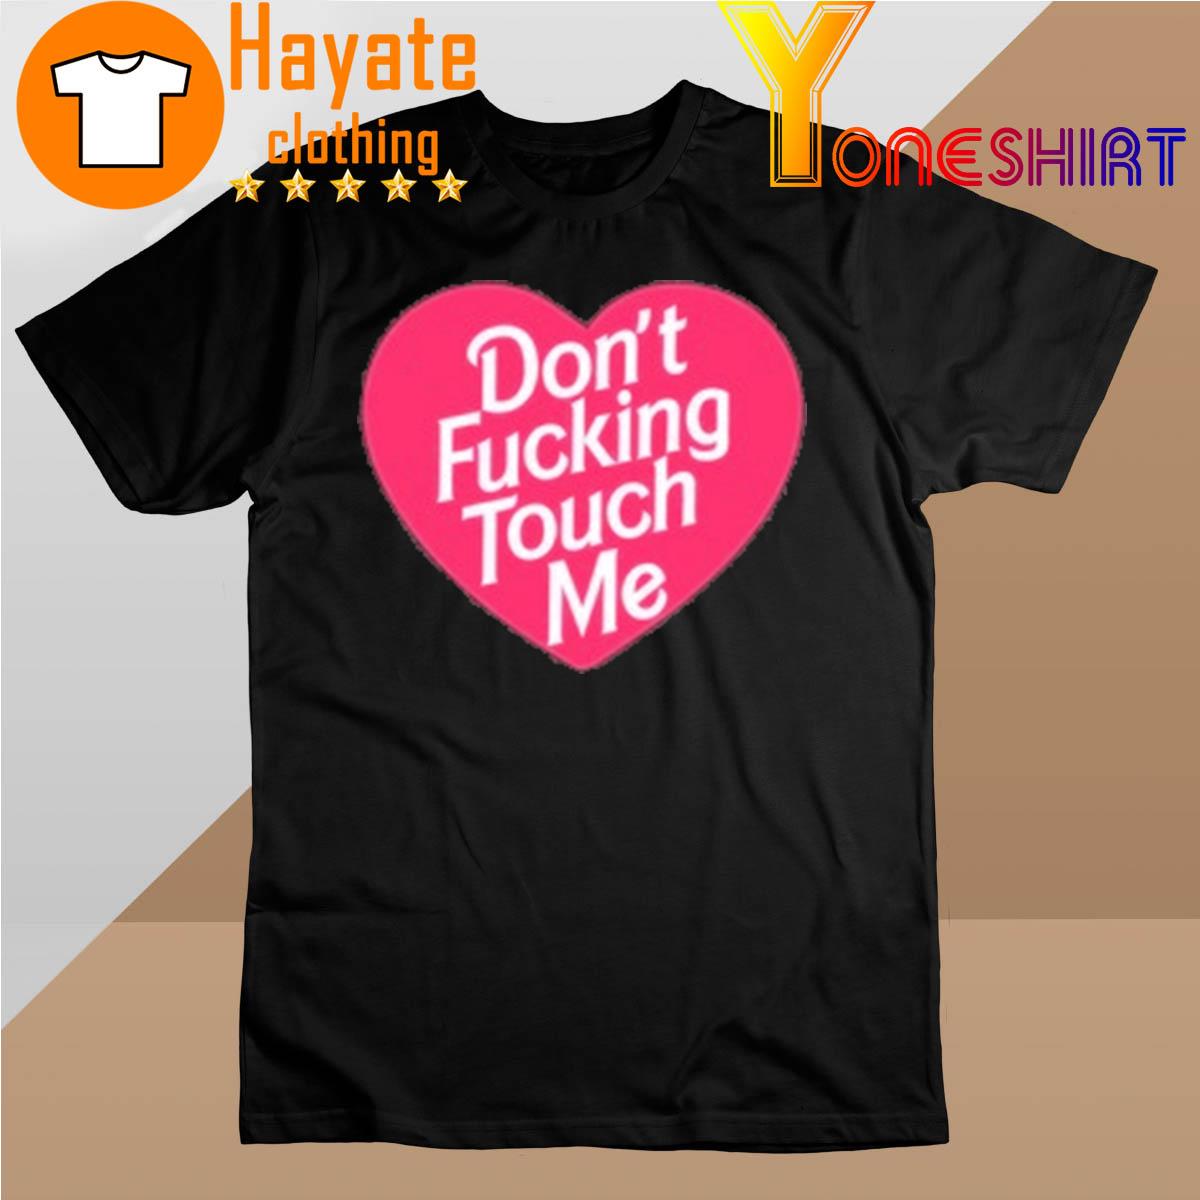 Don’t Fucking Touch Me shirt